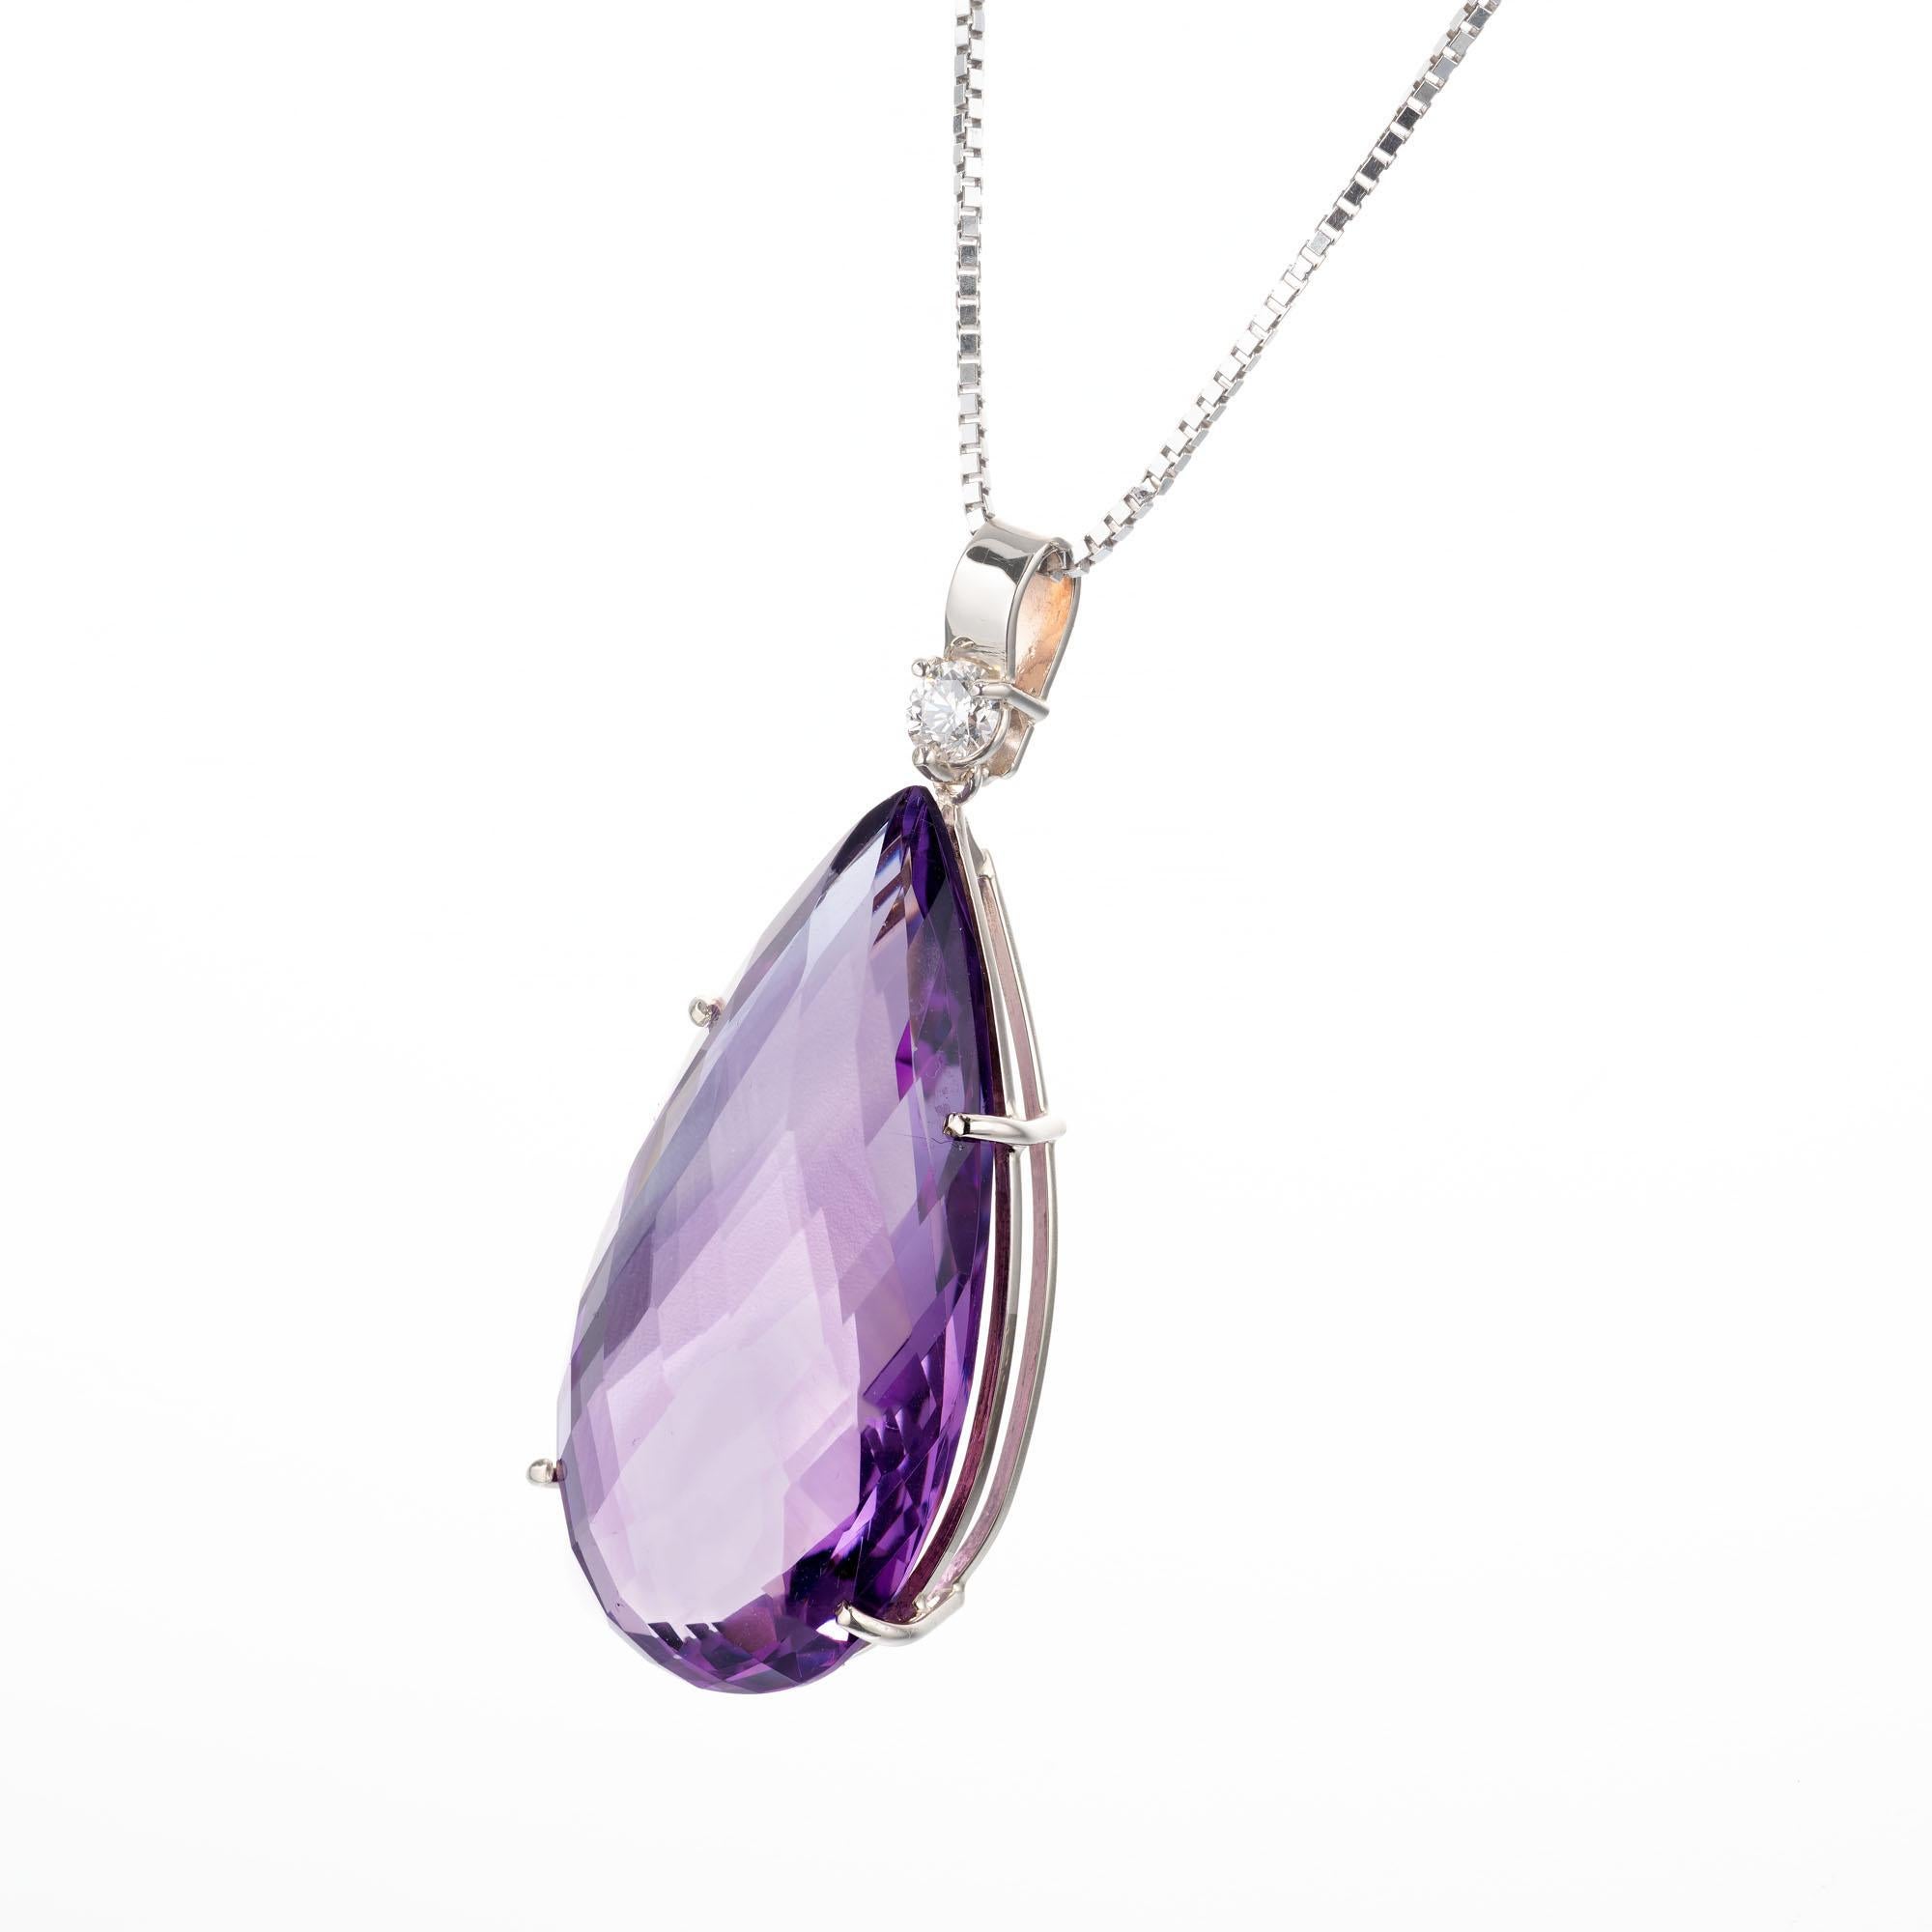 Pear shape 36.16 carat amethyst and diamond pendant necklace. Pear shaped center amethyst with a round accent diamond set in 14k white gold. Crafted in the Peter Suchy workshop. 

1 pear shape purple amethyst, approx. 36.16cts
1 round brilliant cut